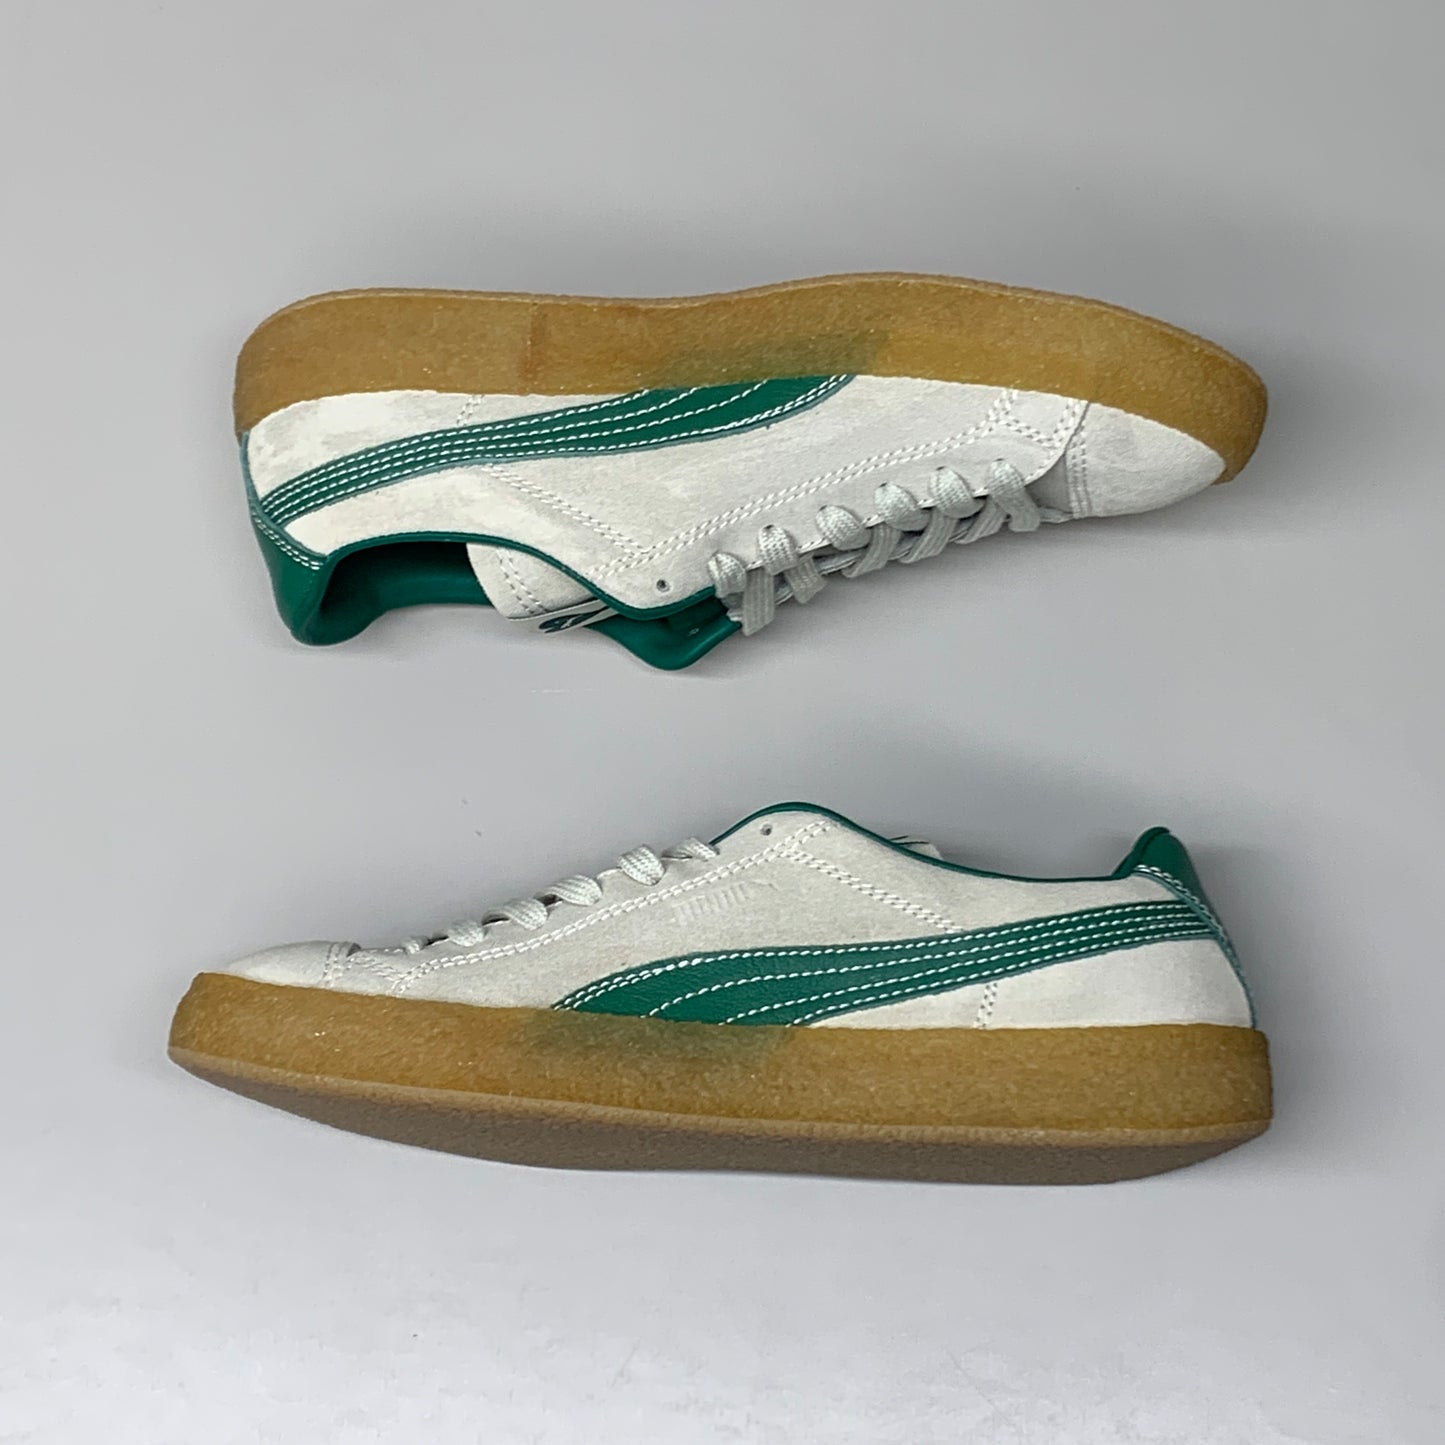 Puma AMI X Suede Crepe Lace Up Mens Sneakers Casual Shoes SZ 8 38414601 New Other